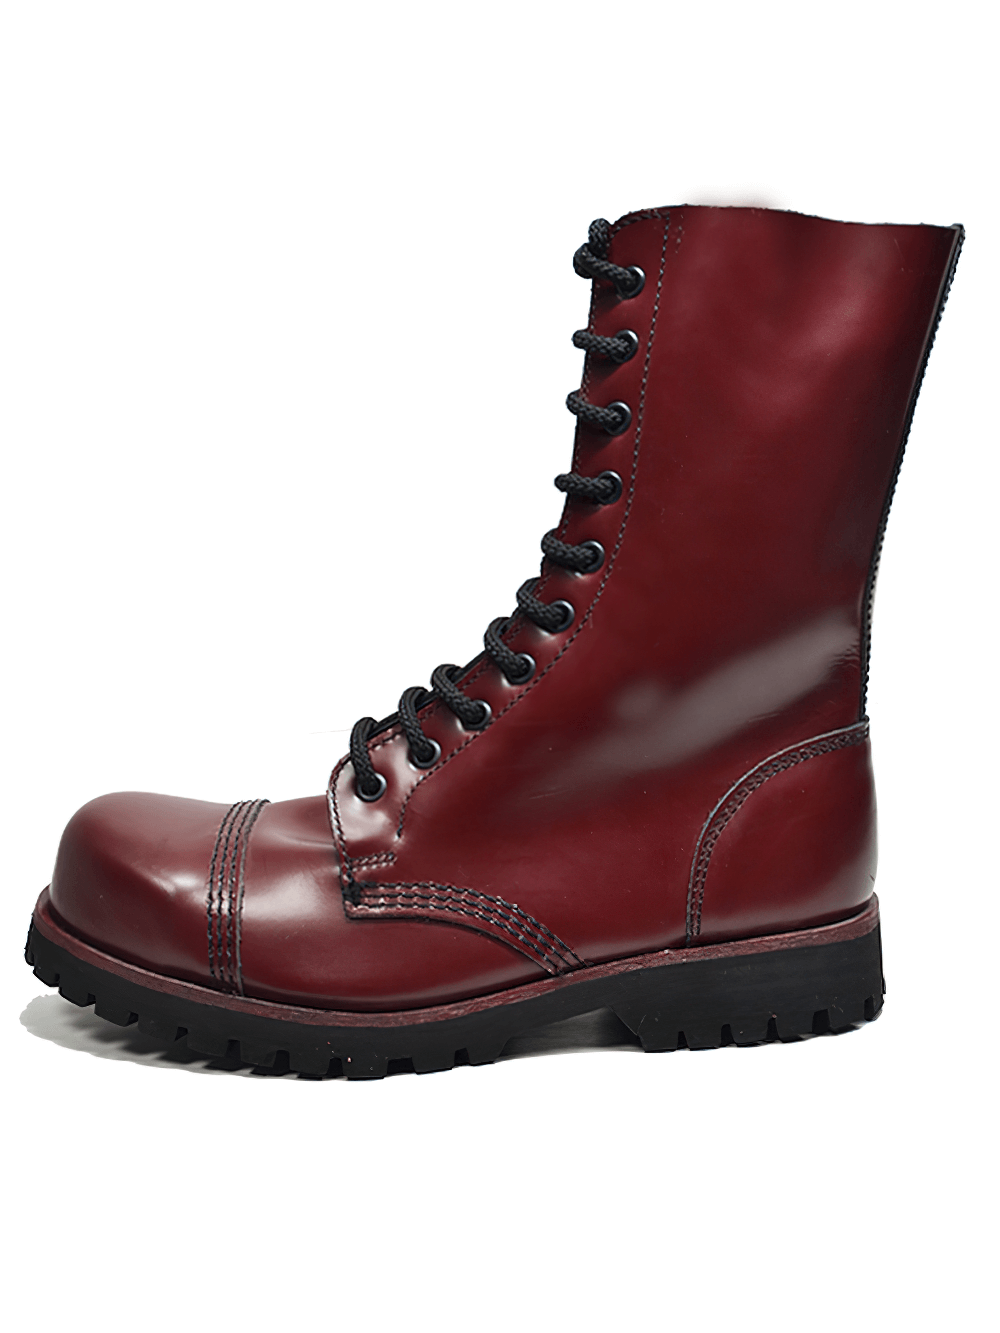 Durable Wine Red 10-Eyelet Steel Toe Lace-Up Boots